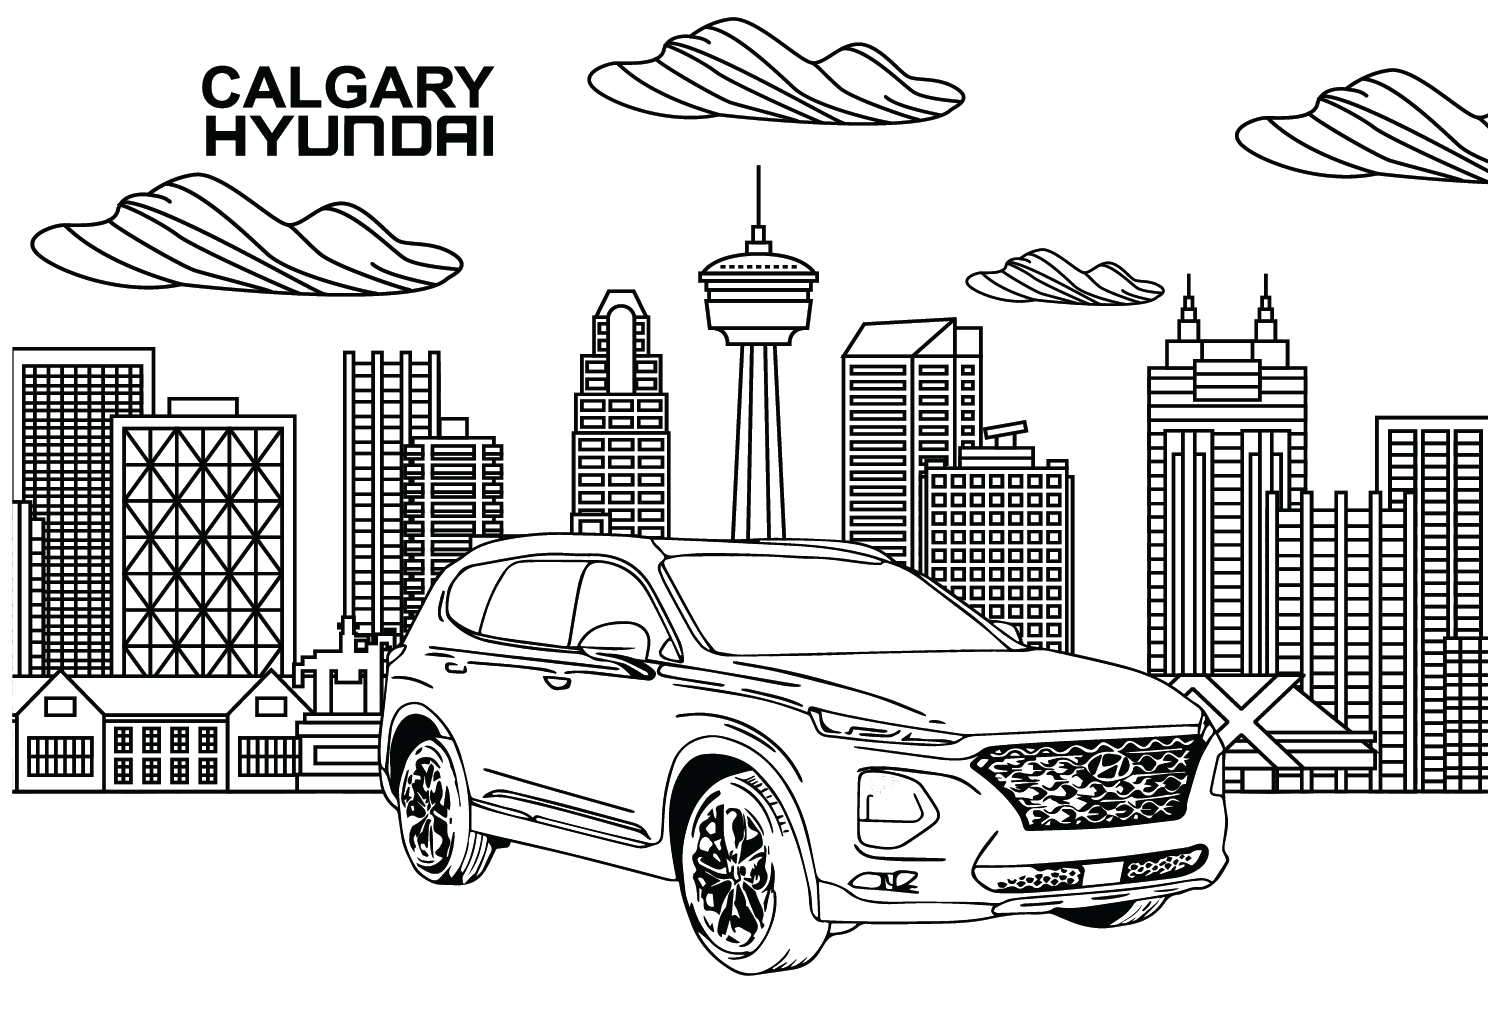 Hyundai Coloring Pages to for Kids from Hyundai